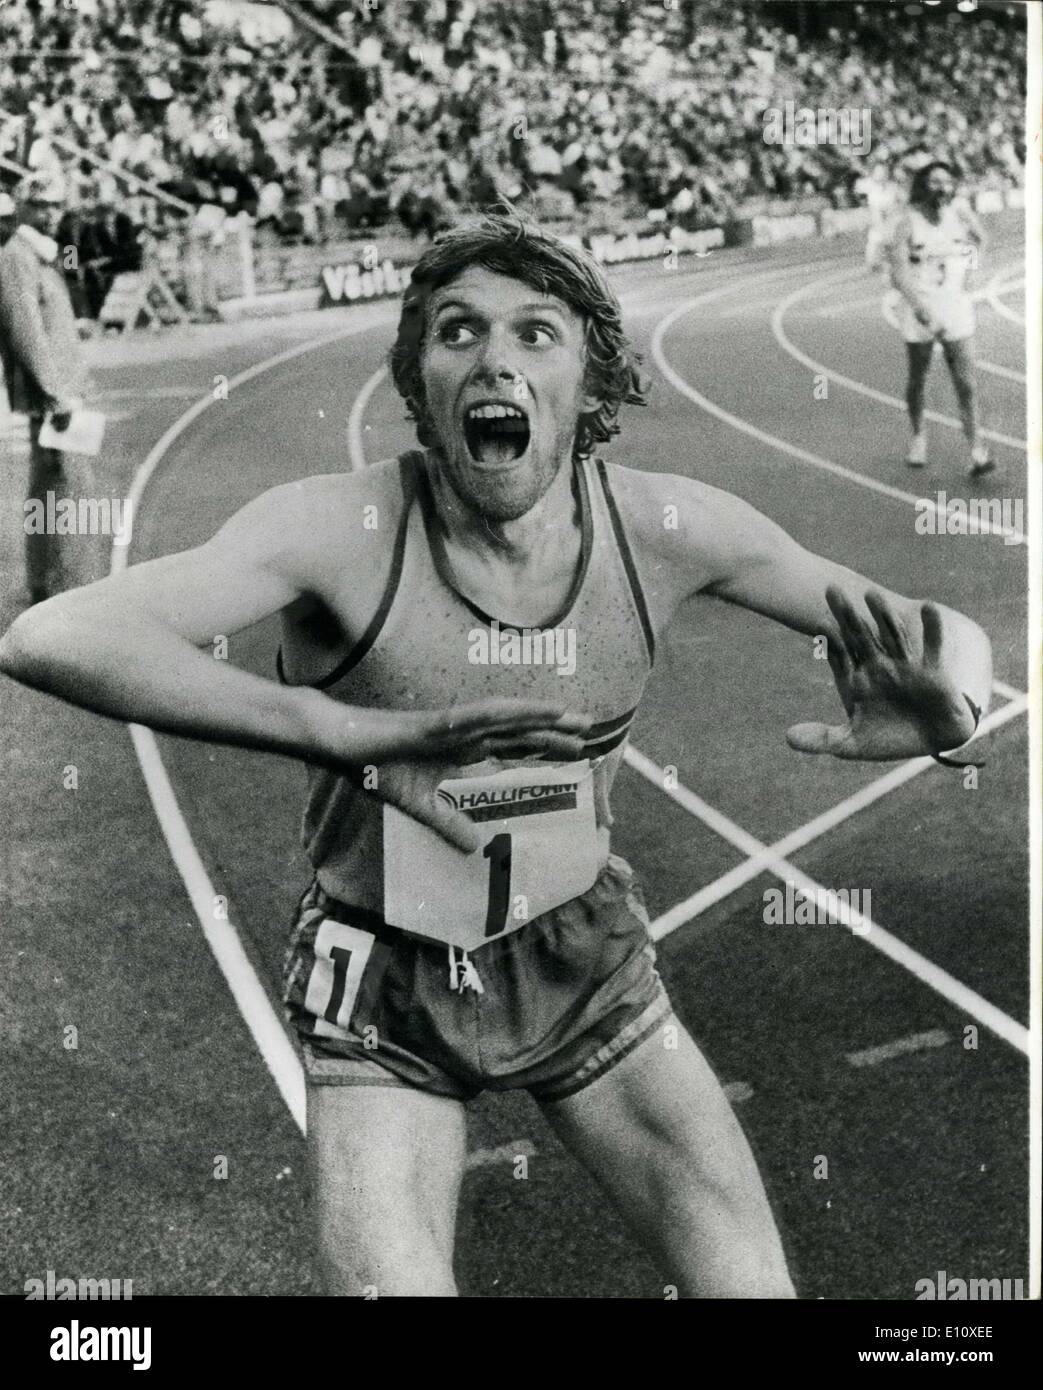 Aug. 03, 1974 - Athletics In Stockholm. Great Britain Vs. Sweden. ''I've Won''. Photo Shows:- The look on the face of Dan Glans, of Sweden, shows how pleased he was at winning the 3,000 M. Steeplechase event during the Great Britain V. Sweden athletics match in Stockholm. Stock Photo